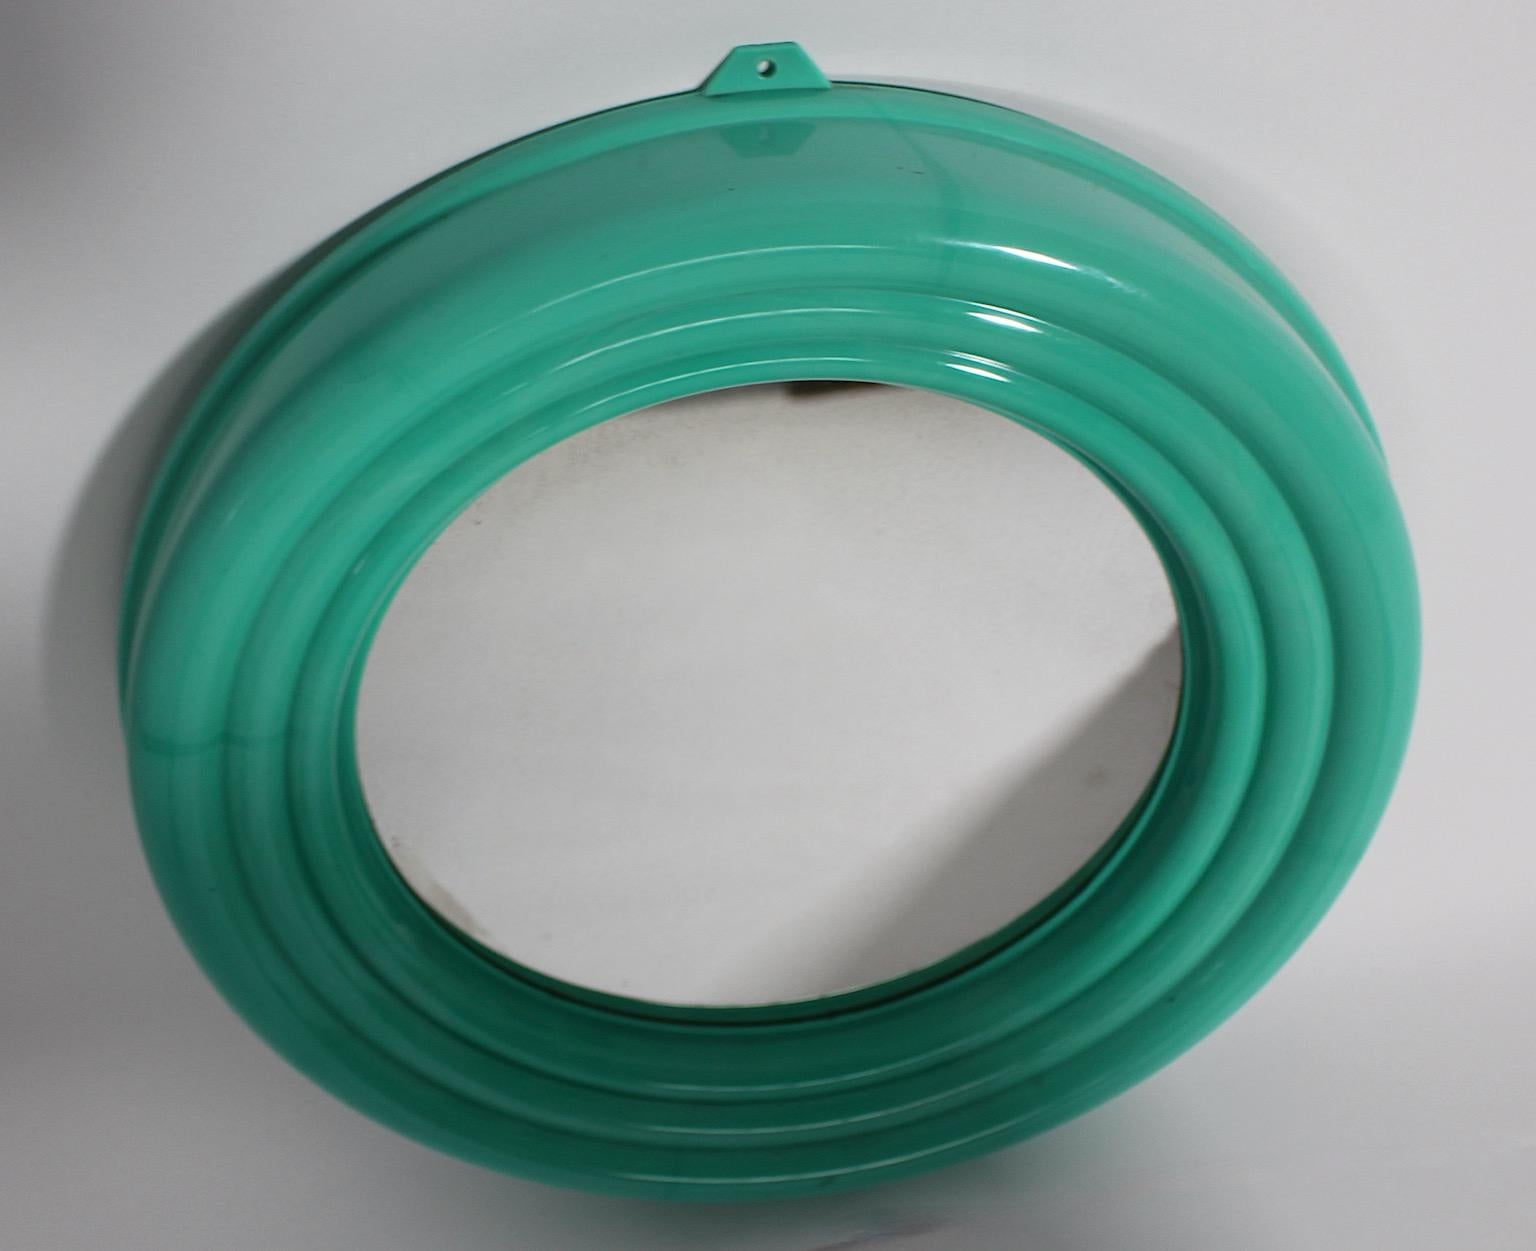 Pop Art Style Green Teal Circular Plastic Wall Mirror 1990s Italy For Sale 1